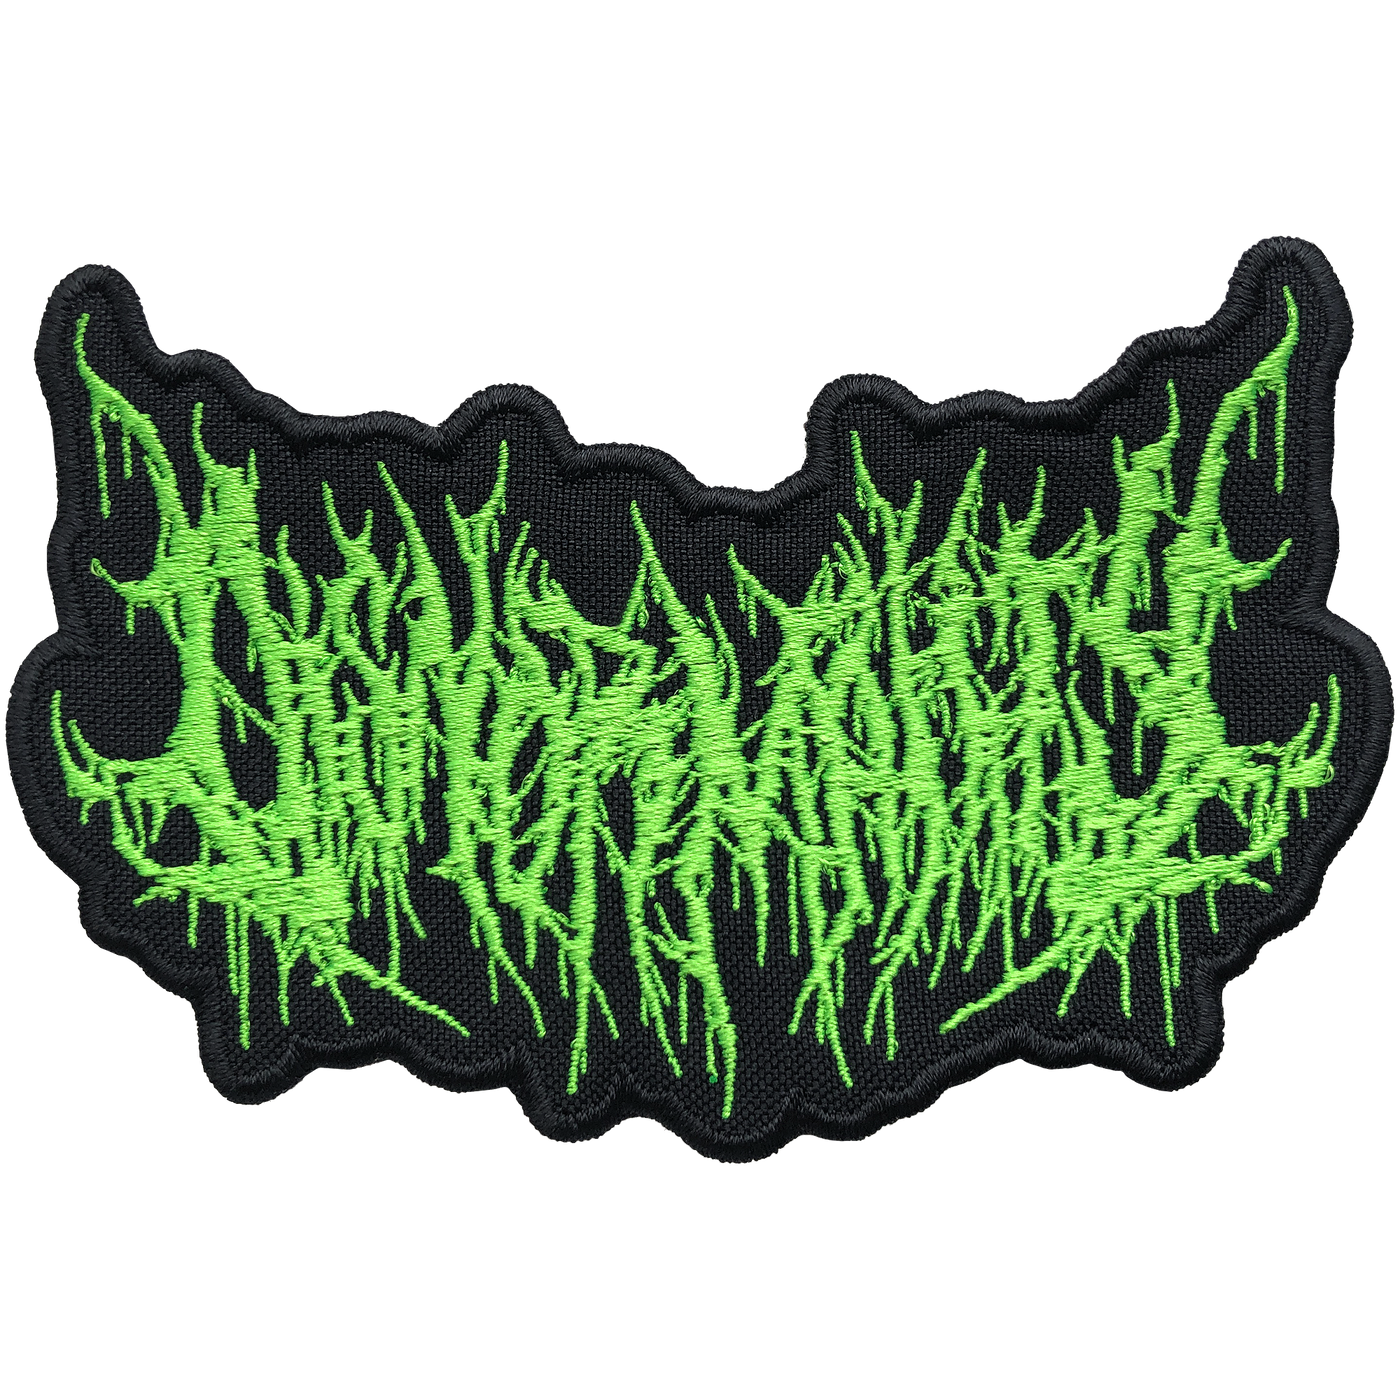 Disnormality Patch